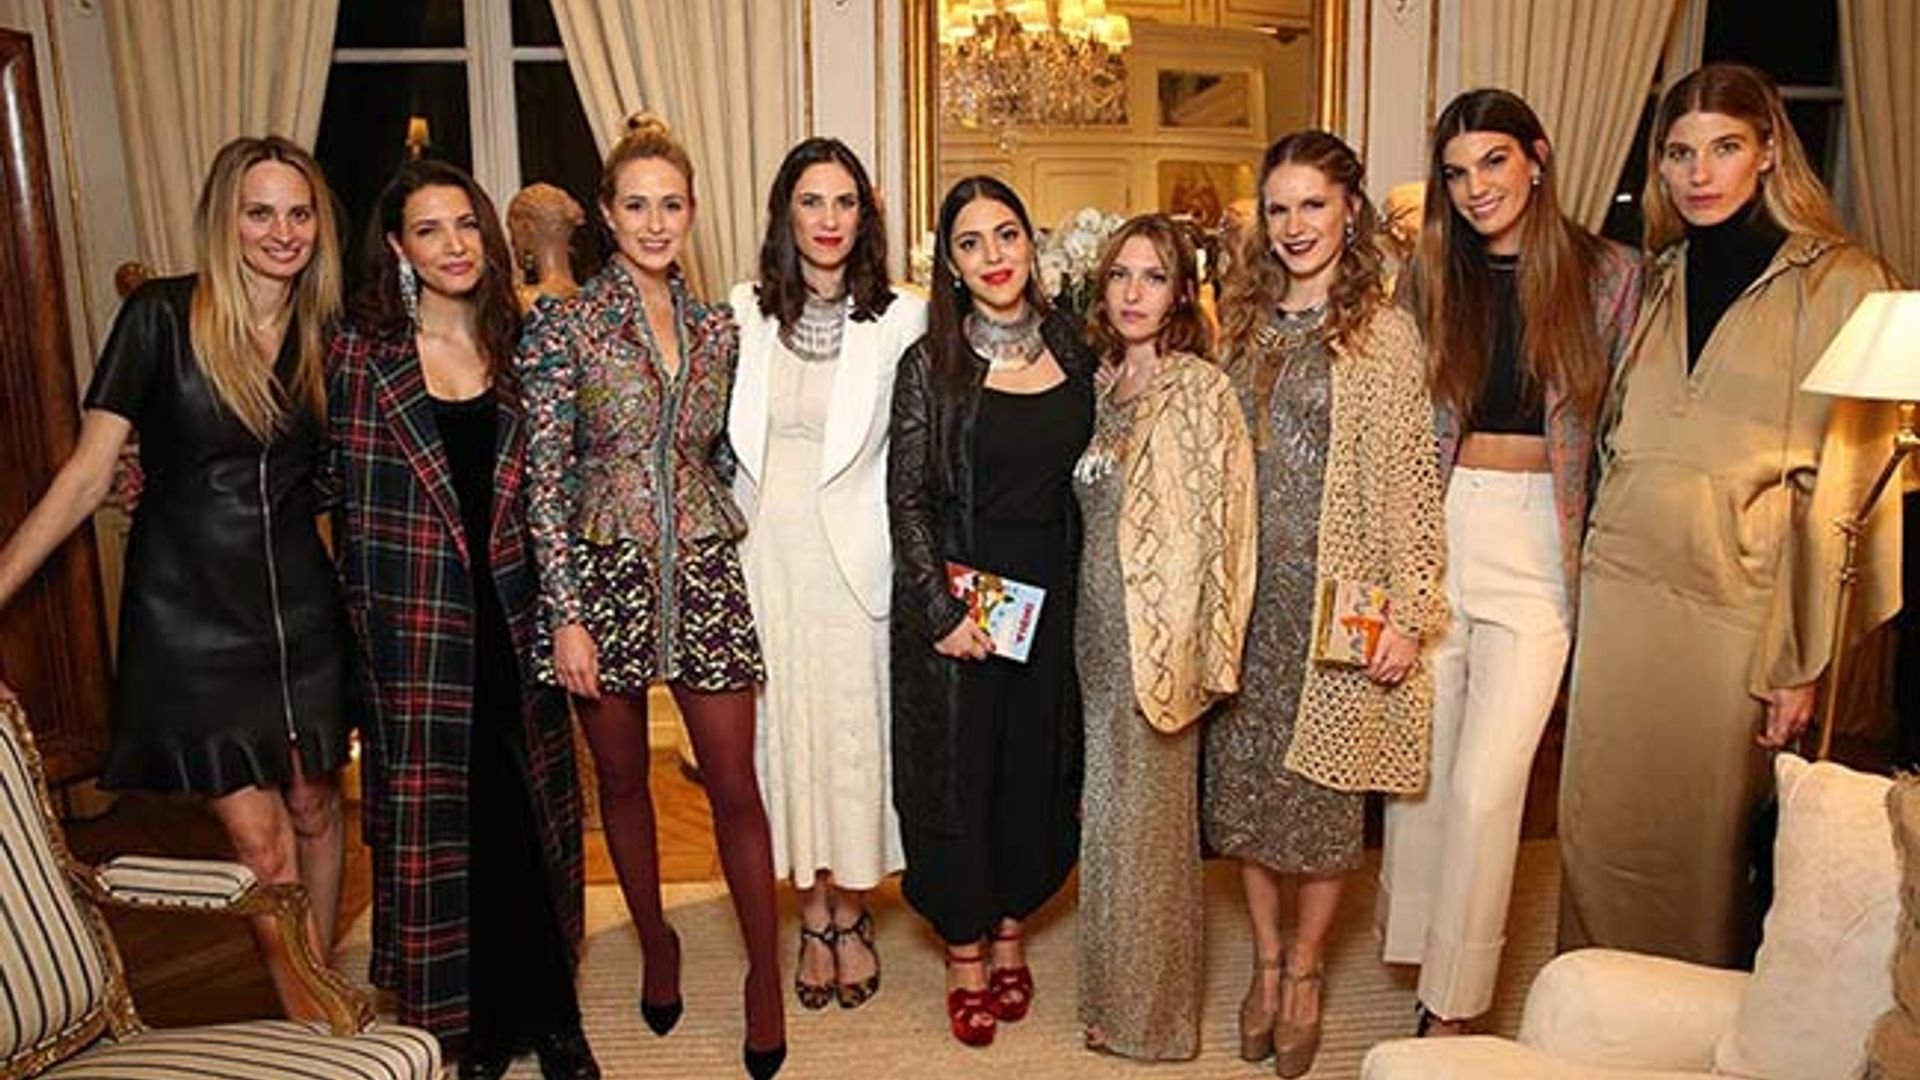 Ralph Lauren hosts star-studded dinner to celebrate new See Now, Buy Now  collection